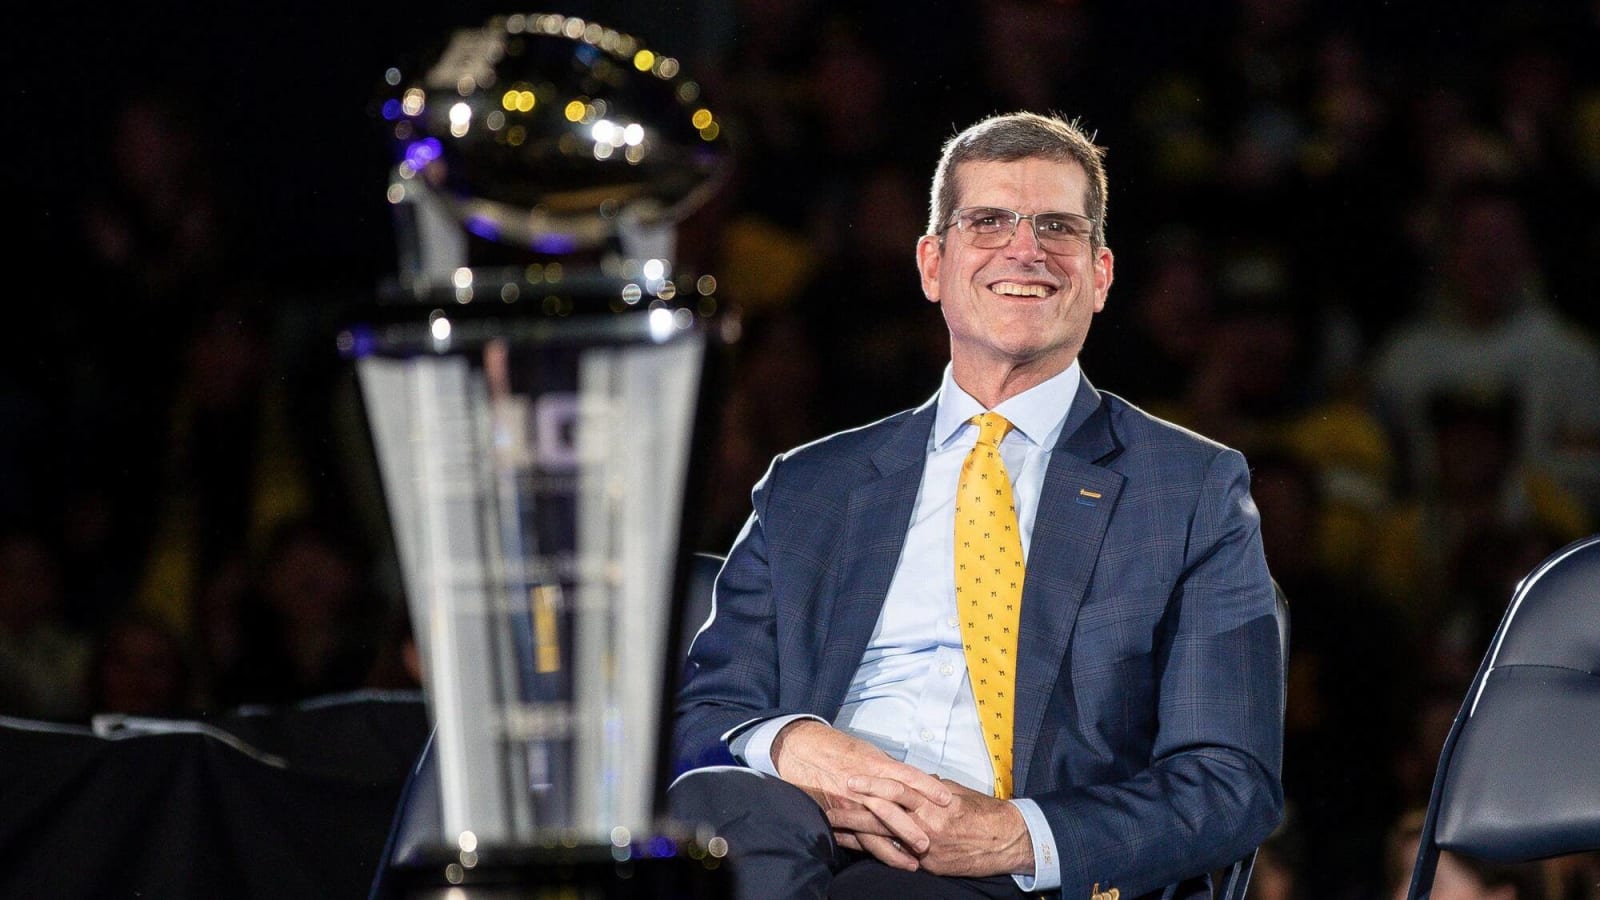 Jim Harbaugh gives great reason for why he left Michigan for NFL